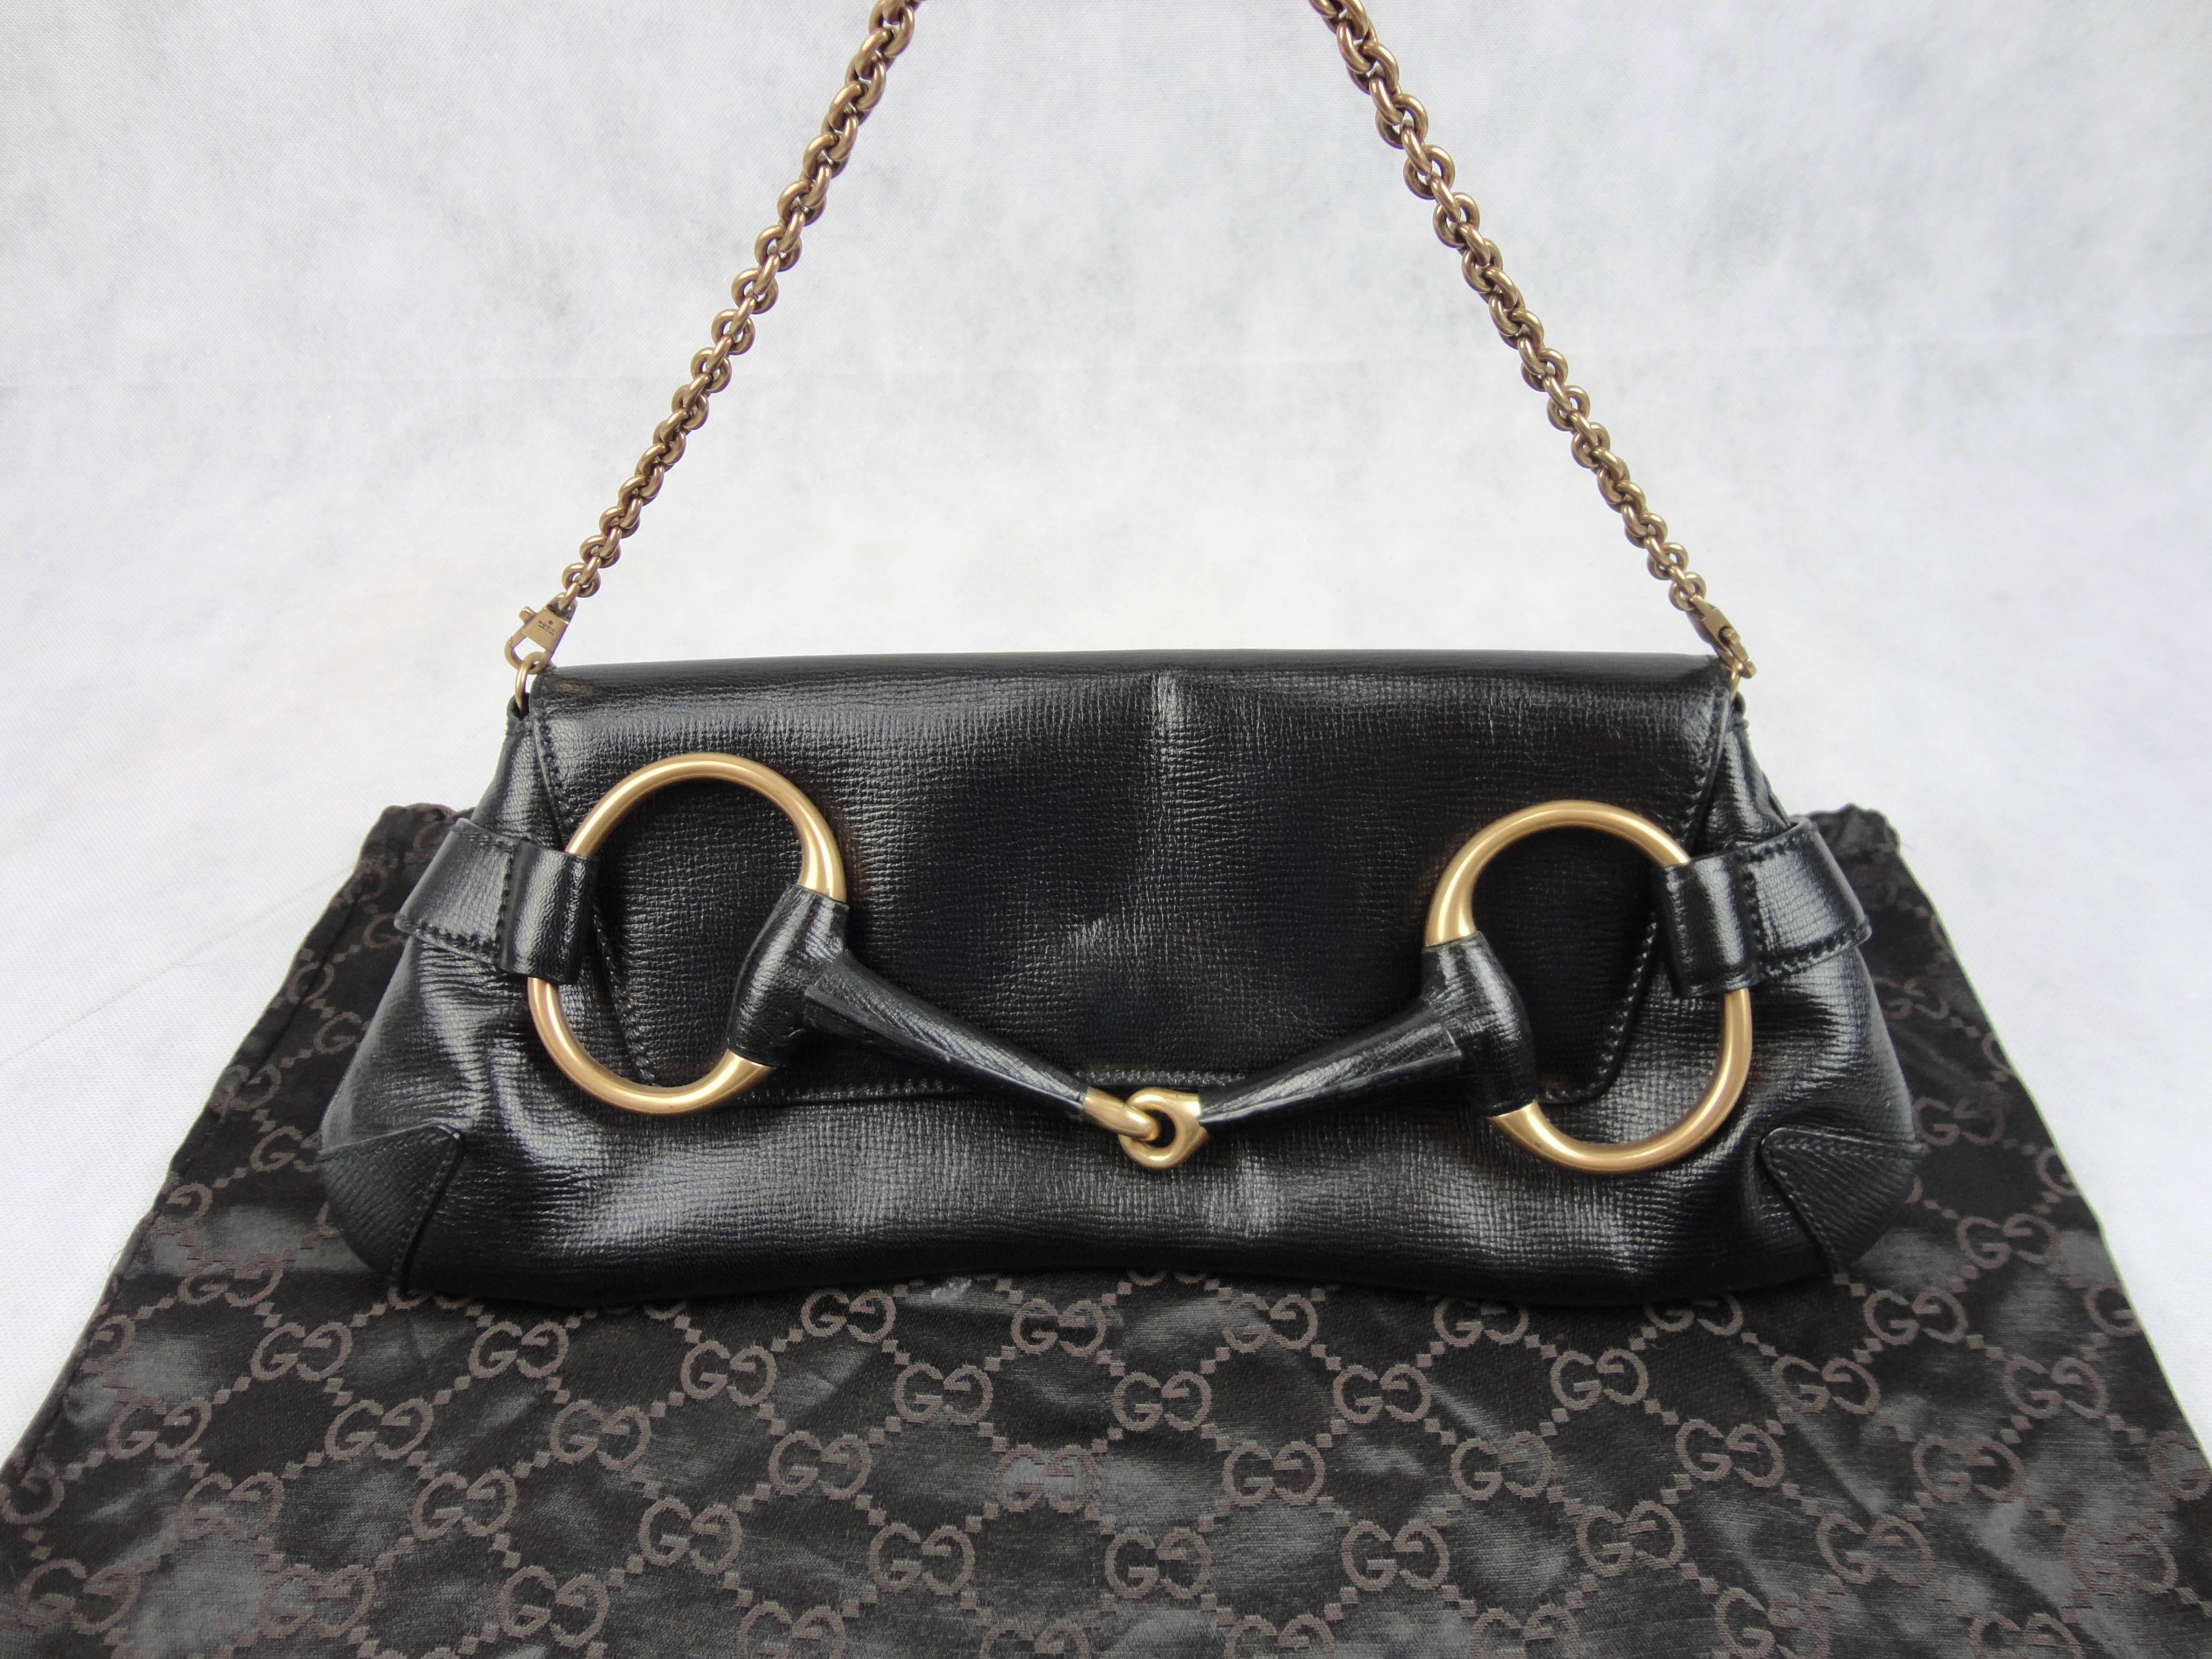 Women's or Men's Gucci Limited Edition Tom Ford Horsebit Clutch